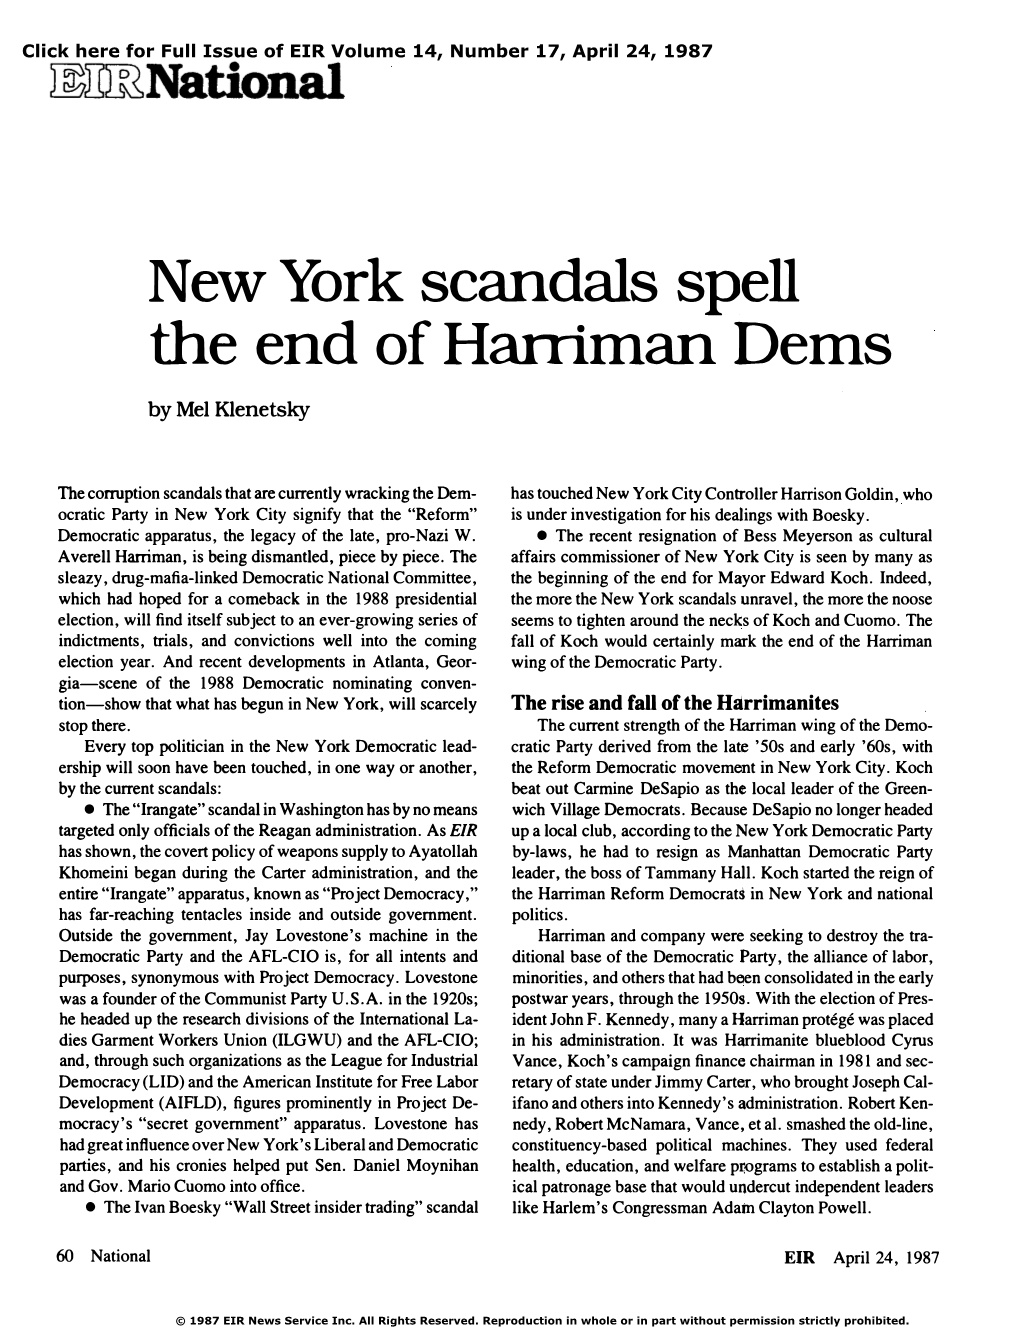 New York Scandals Spell the End of Harriman Dems